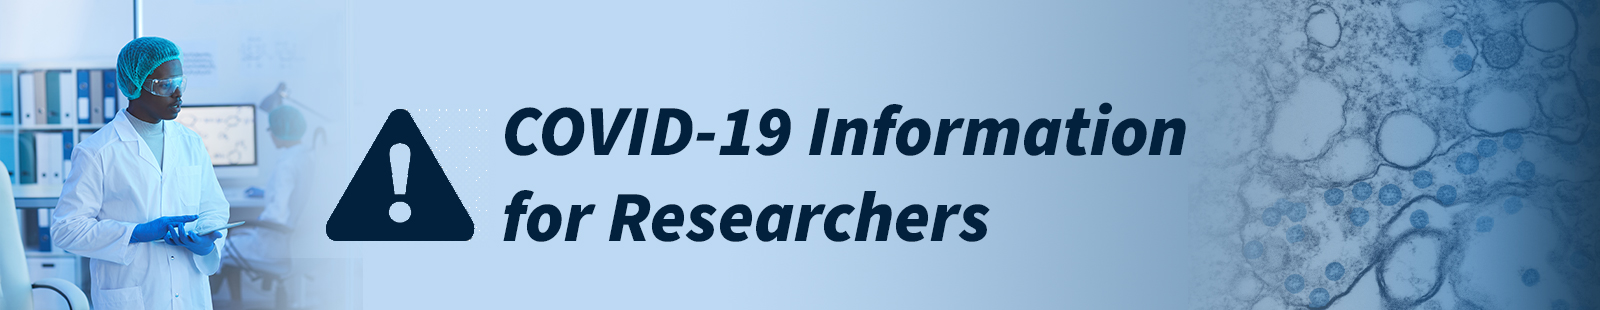 COVID-19 Information for Researchers